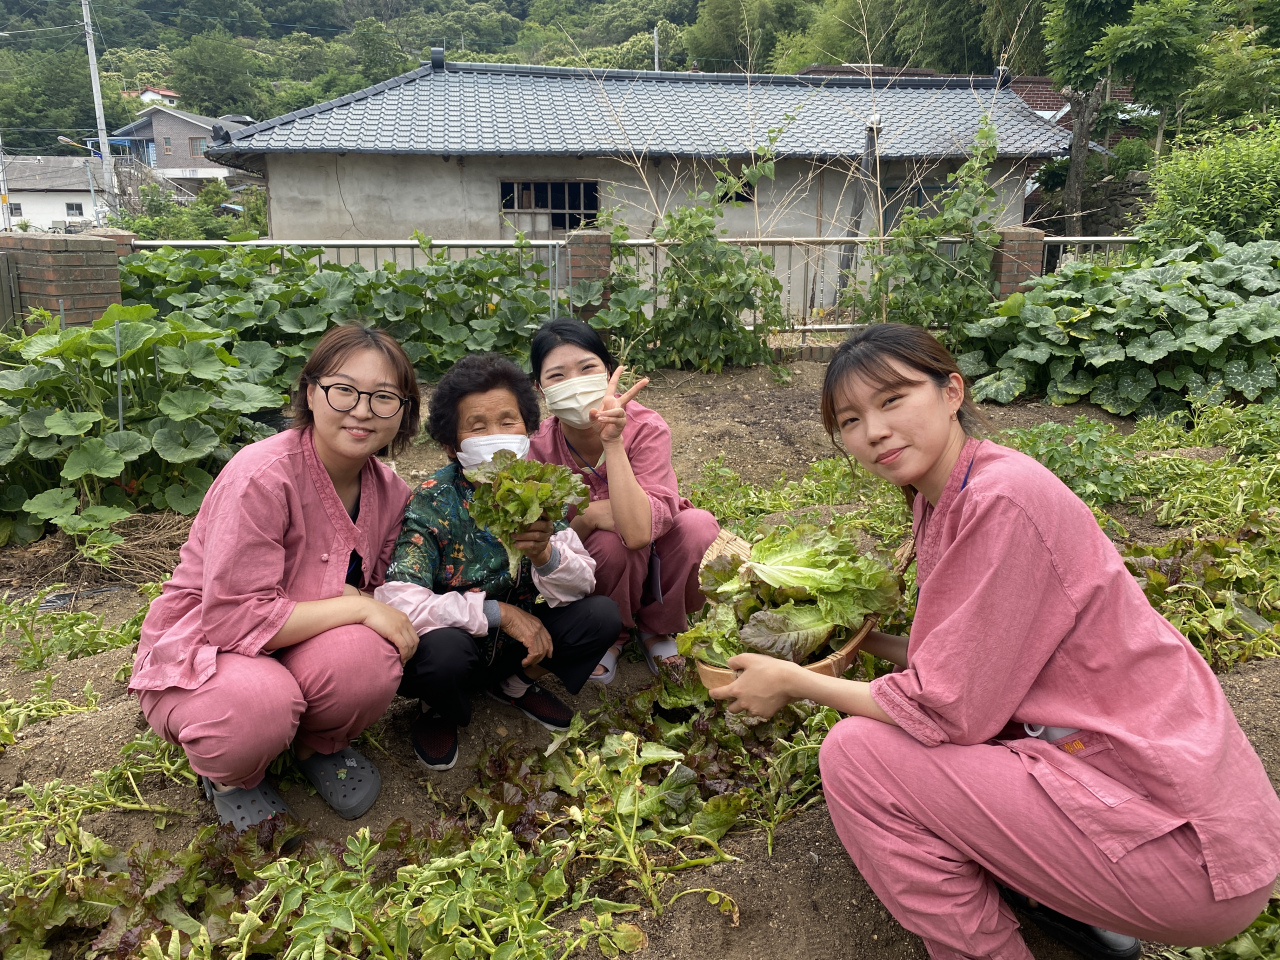 Participants of “Thanks, halmae” project harvest lettuce from an older resident‘s garden in Hamyang County in South Gyeongsang Province, on June 18. (Park Seo-won)